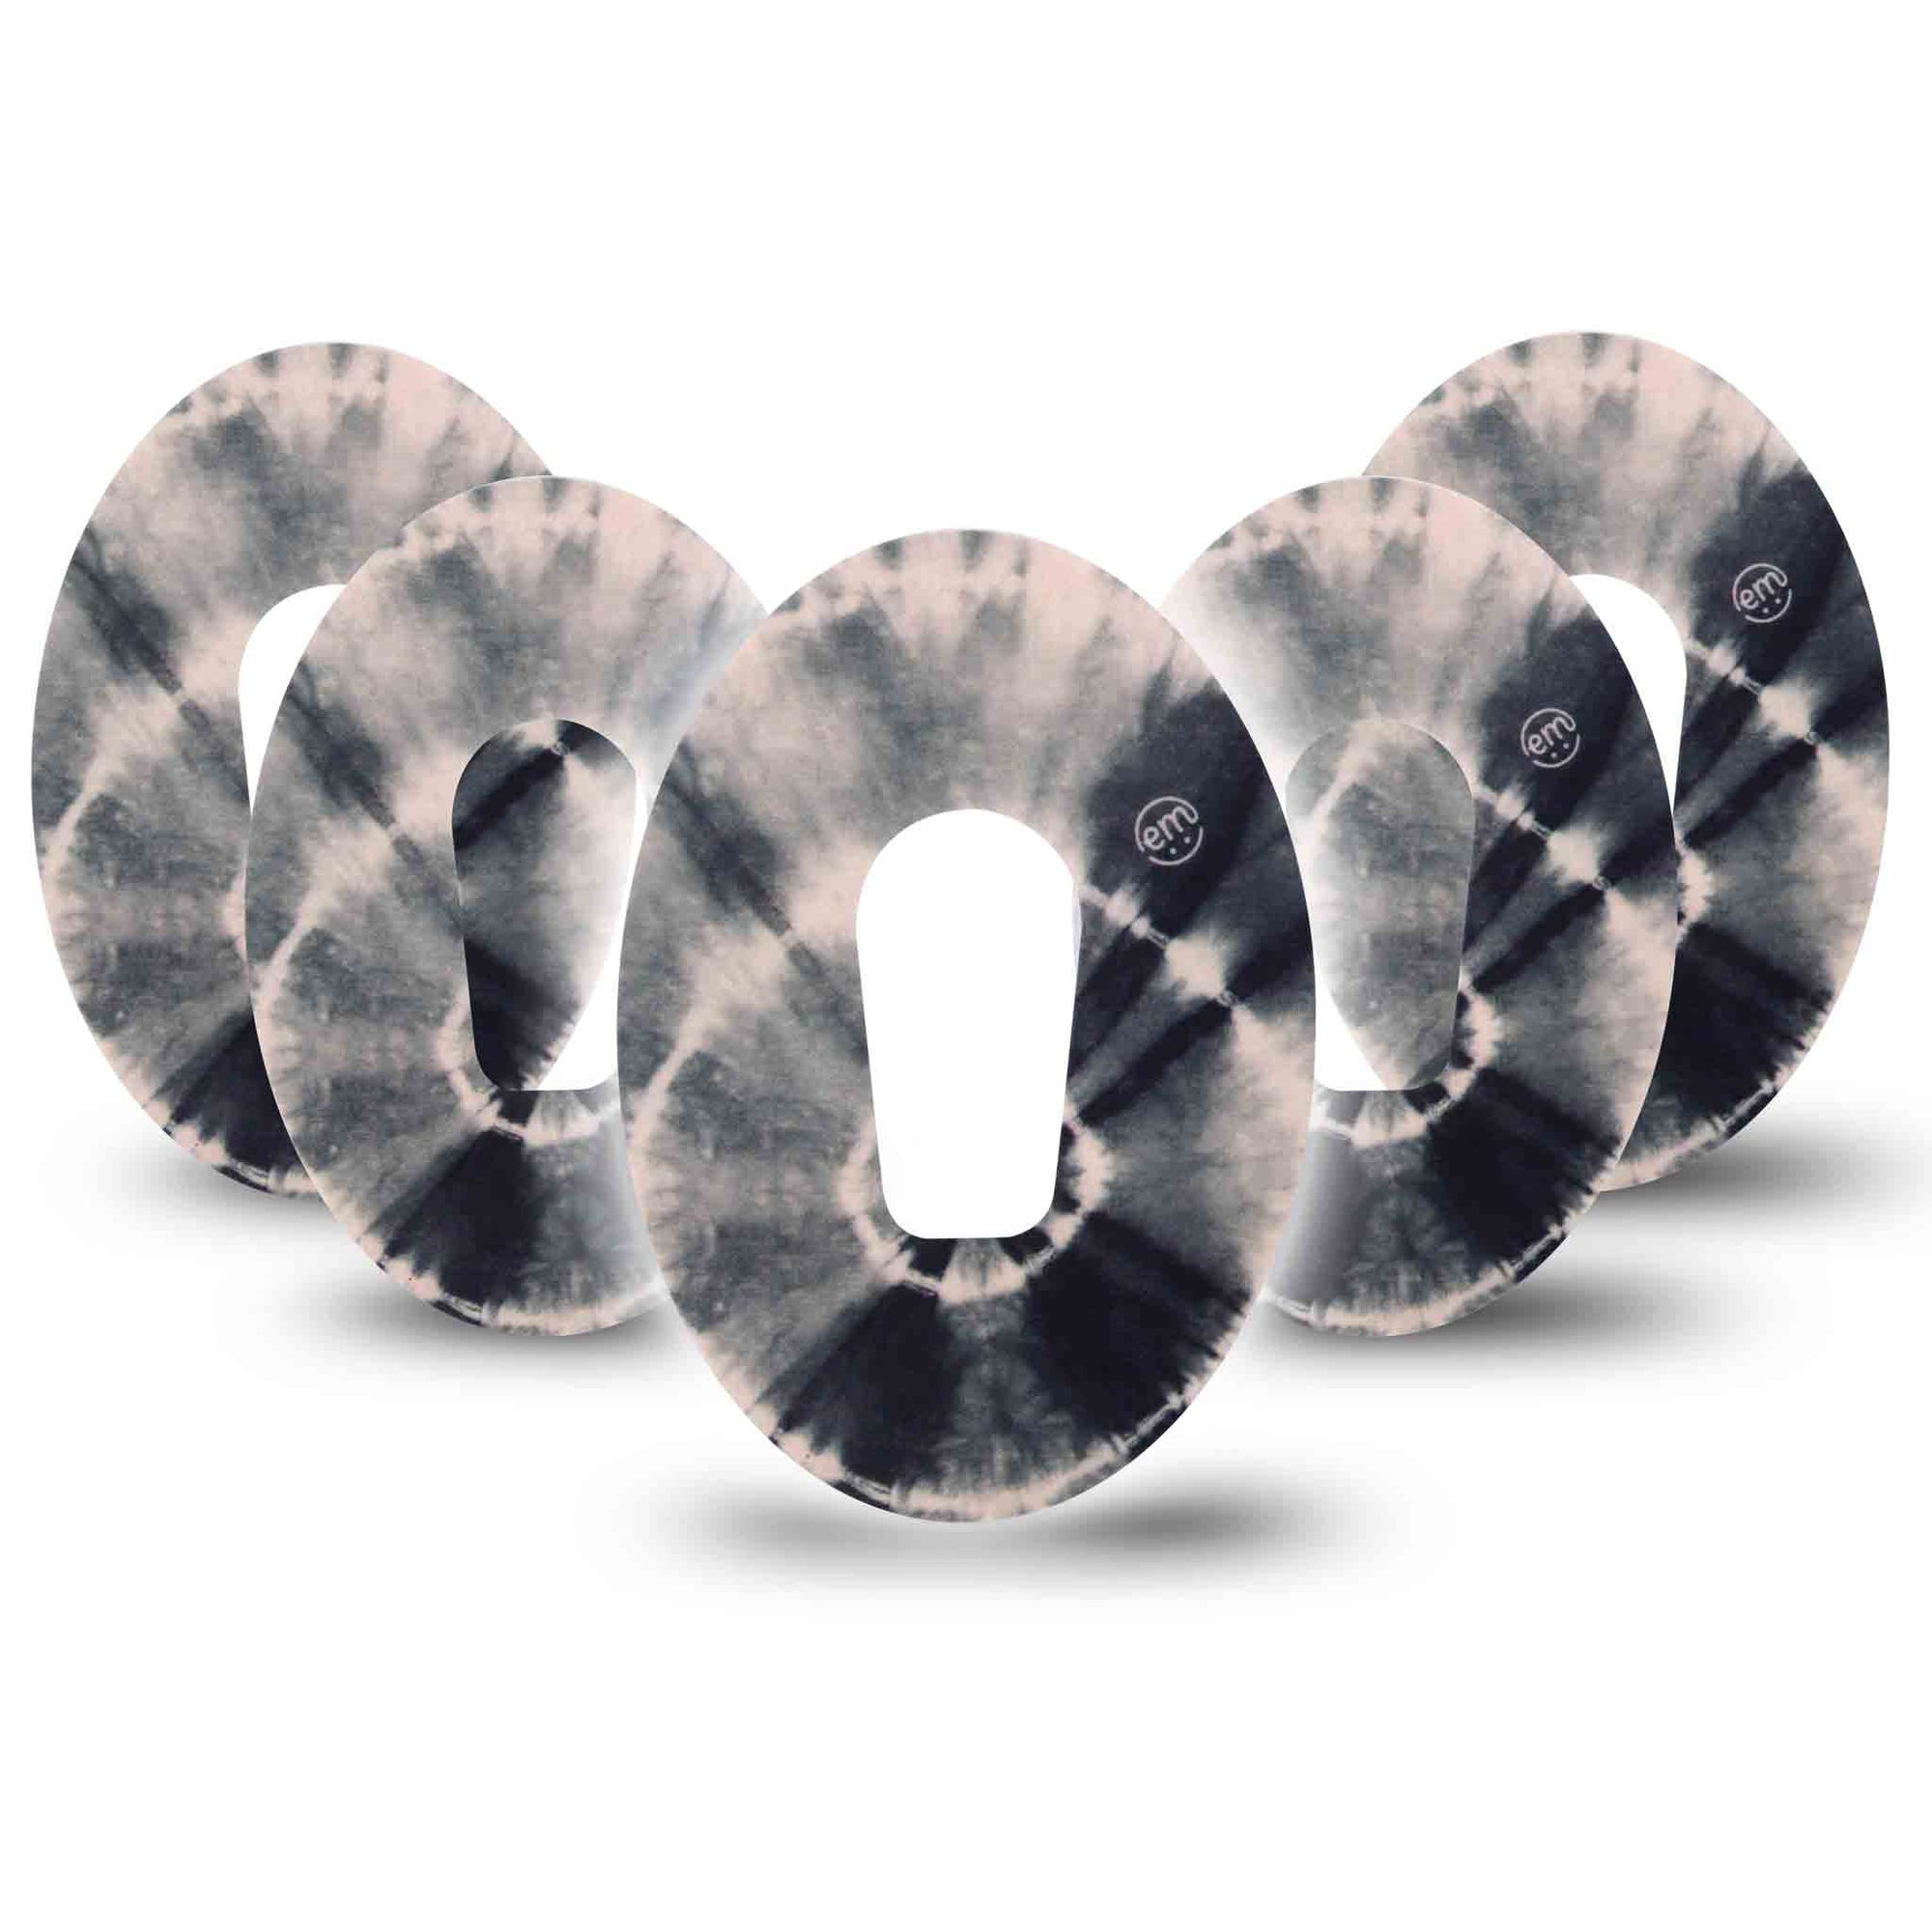 ExpressionMed Black and Grey Tie Dye Dexcom G6 Overpatch 5-Pack